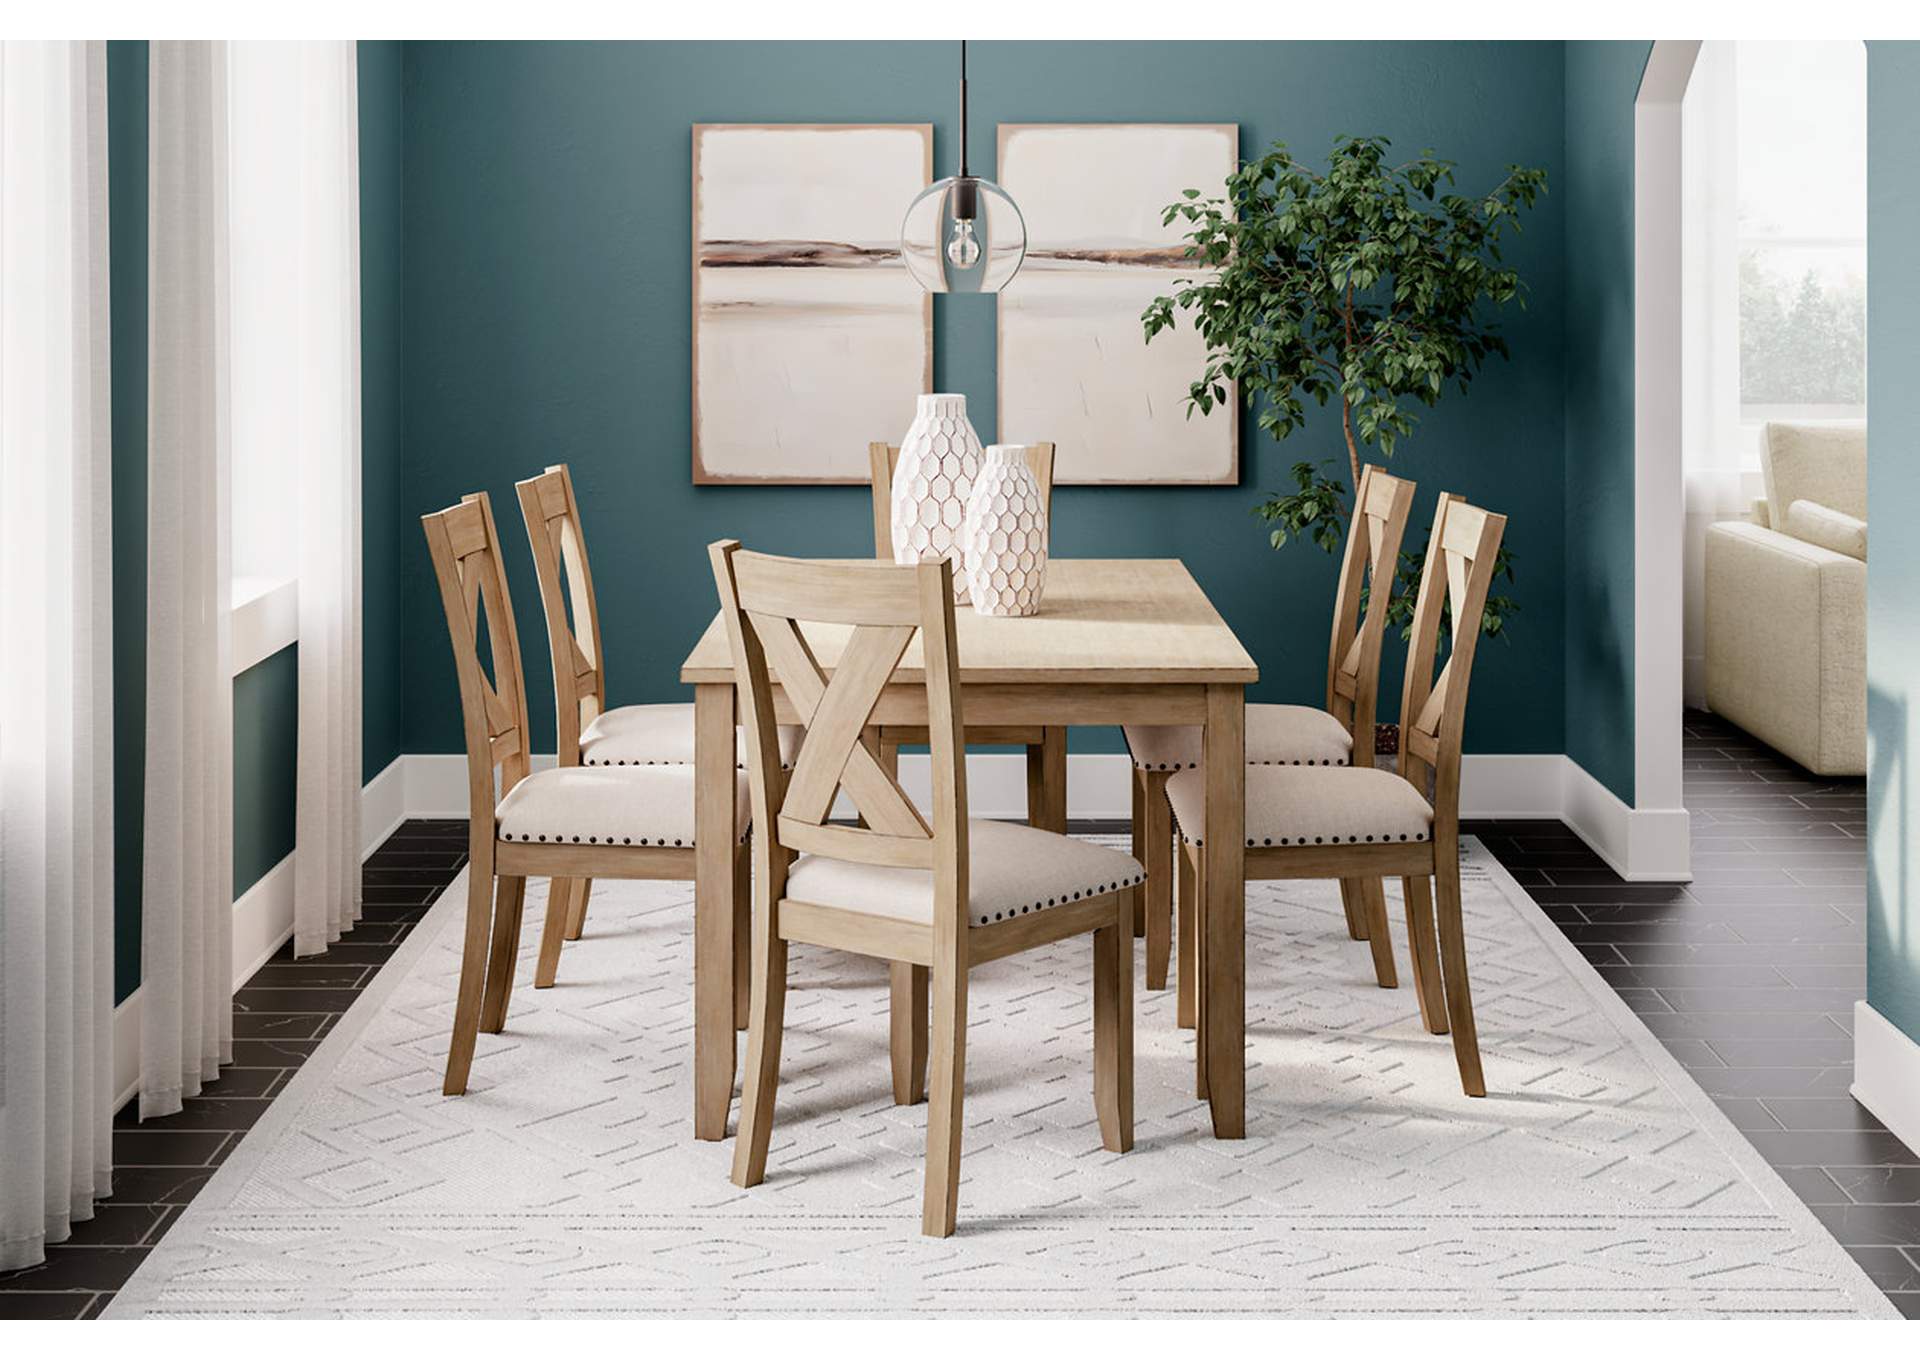 Sanbriar Dining Table and Chairs (Set of 7),Signature Design By Ashley